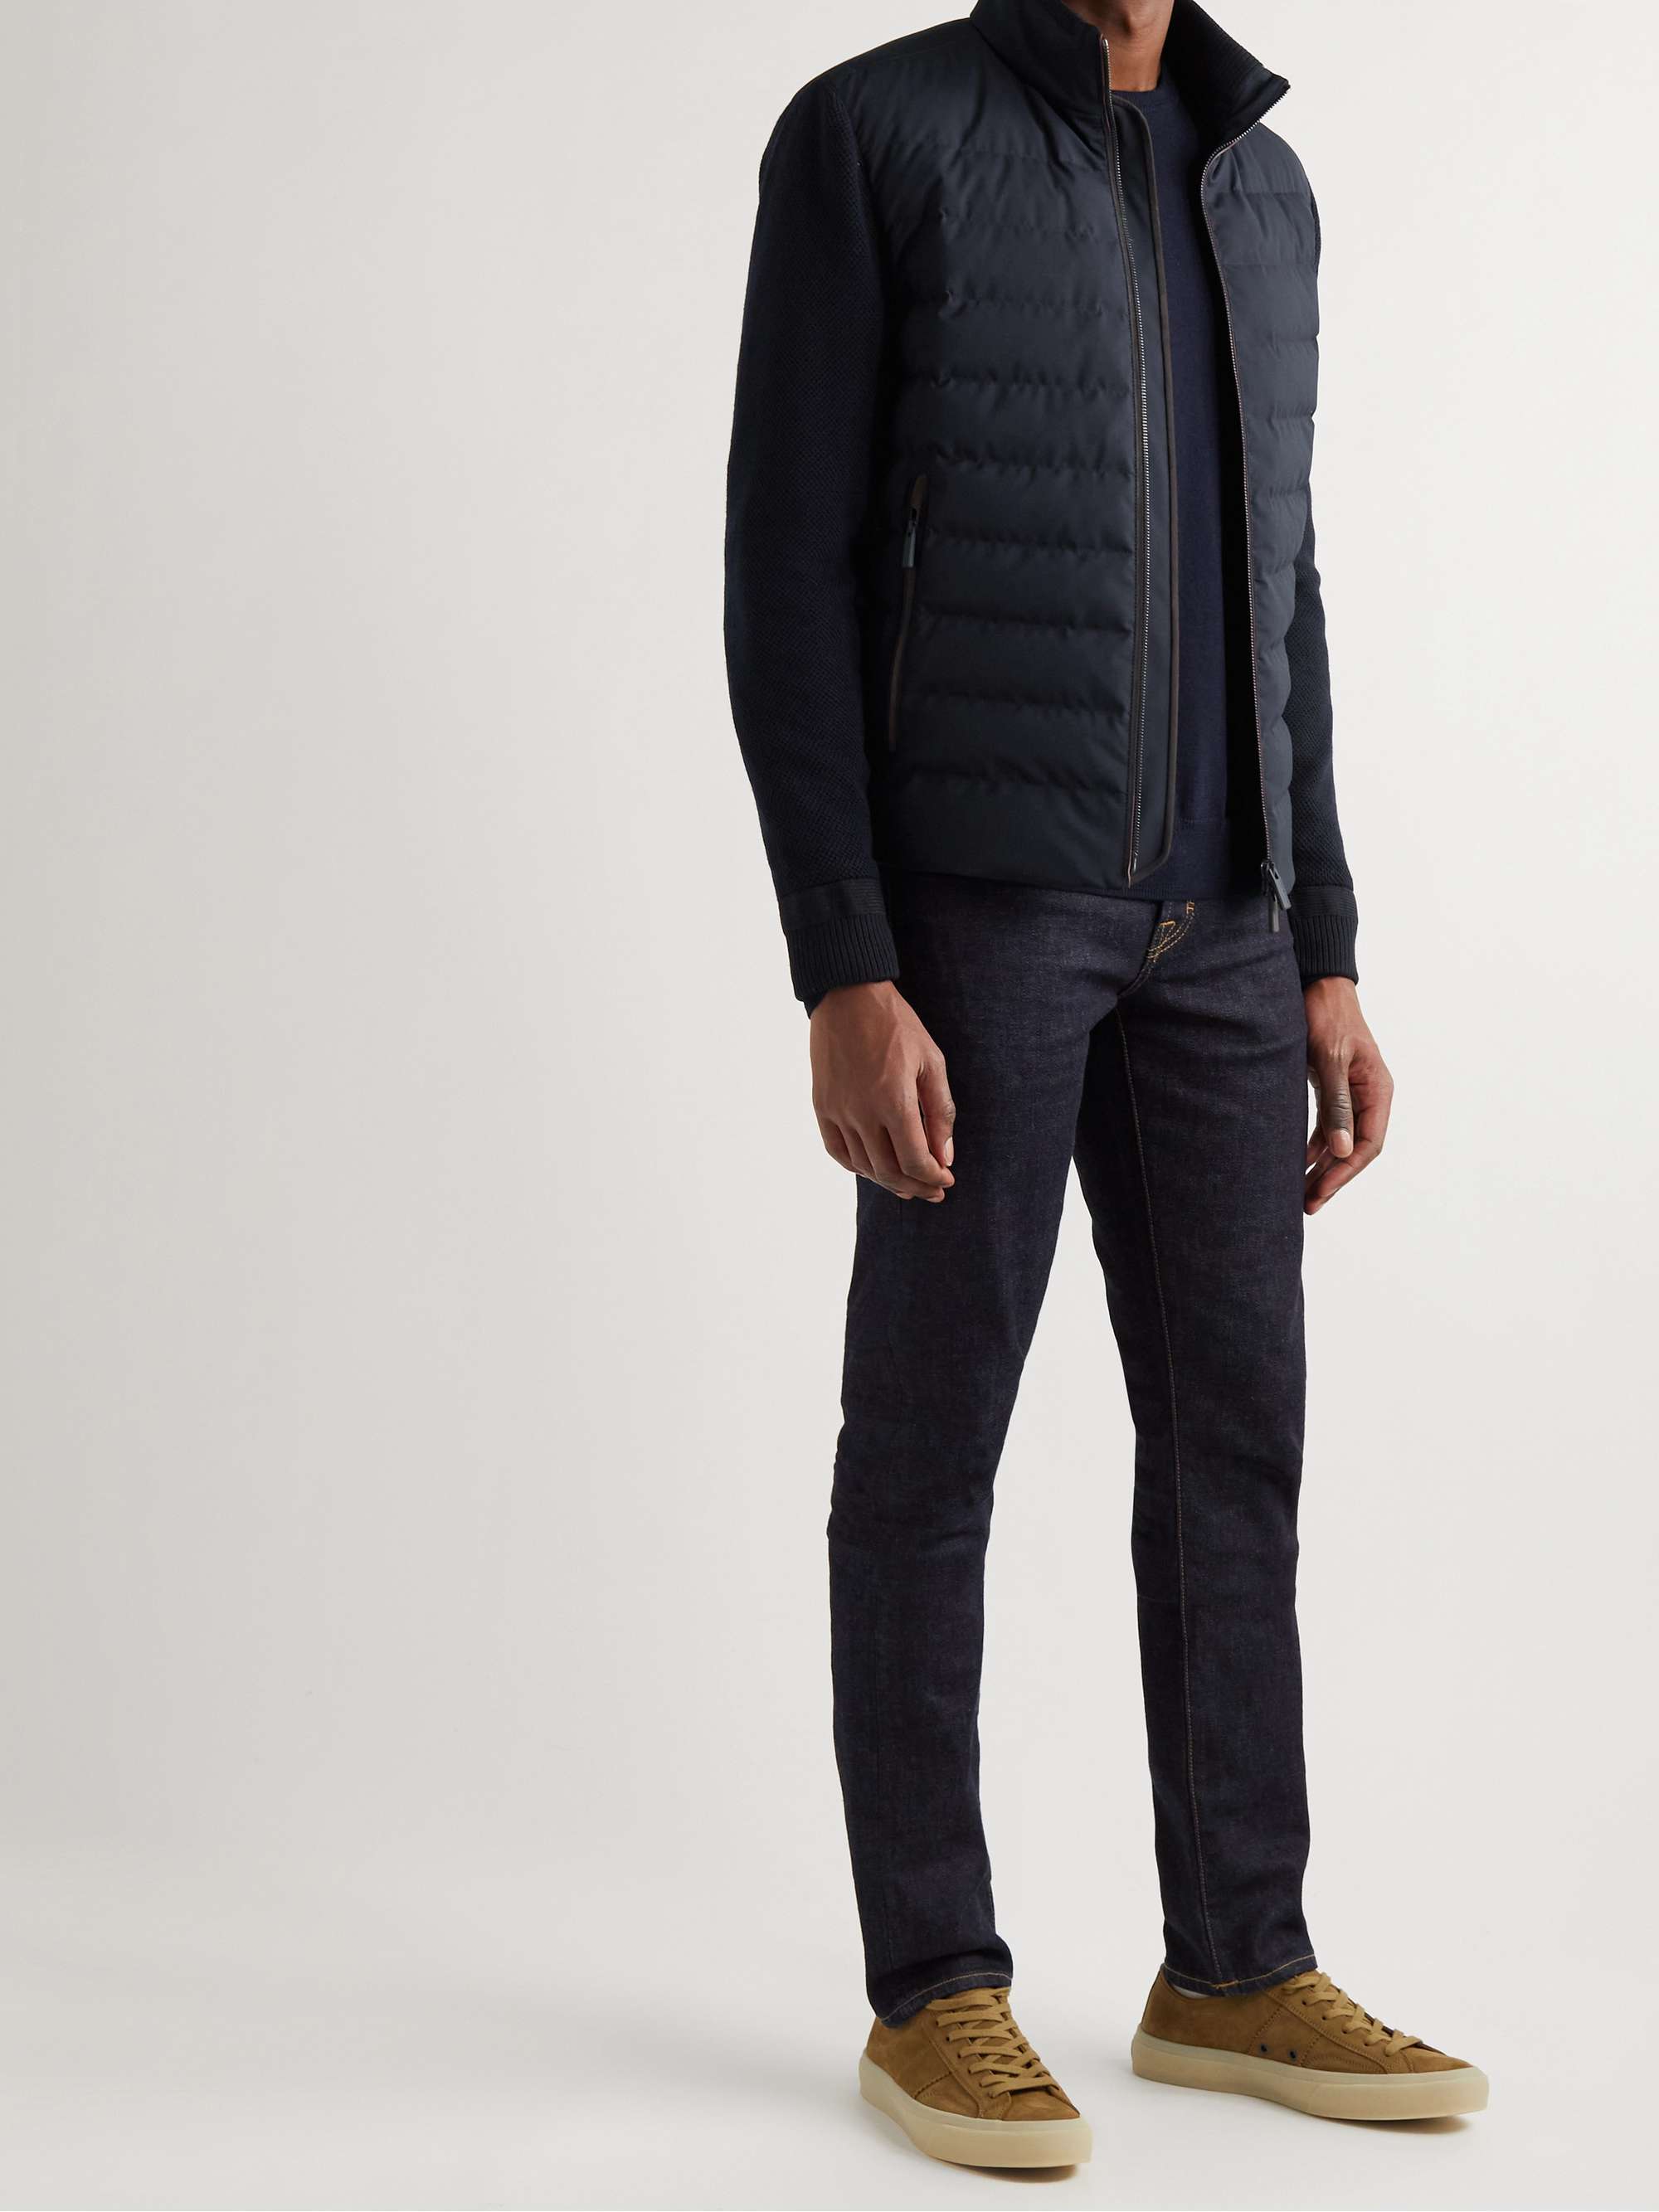 ZEGNA Trofeo Elements Quilted Merino Wool and Cotton-Blend Down Jacket